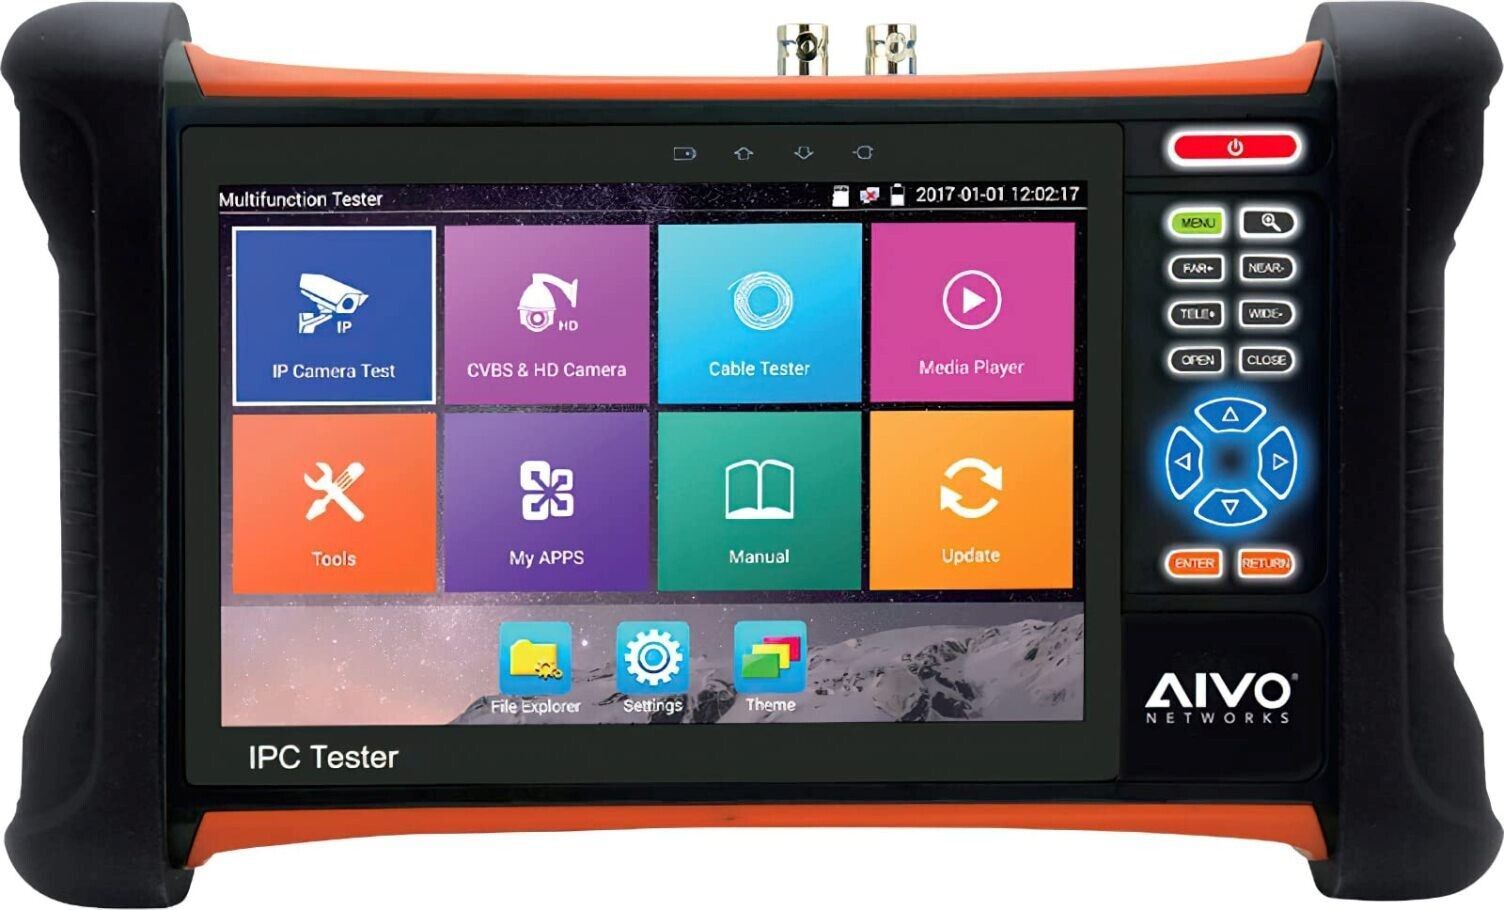 Primary image for AVYCON AIVO-70A4K All-in-one 7" H.265 4K Network Tester, 1920x1200 Resolution